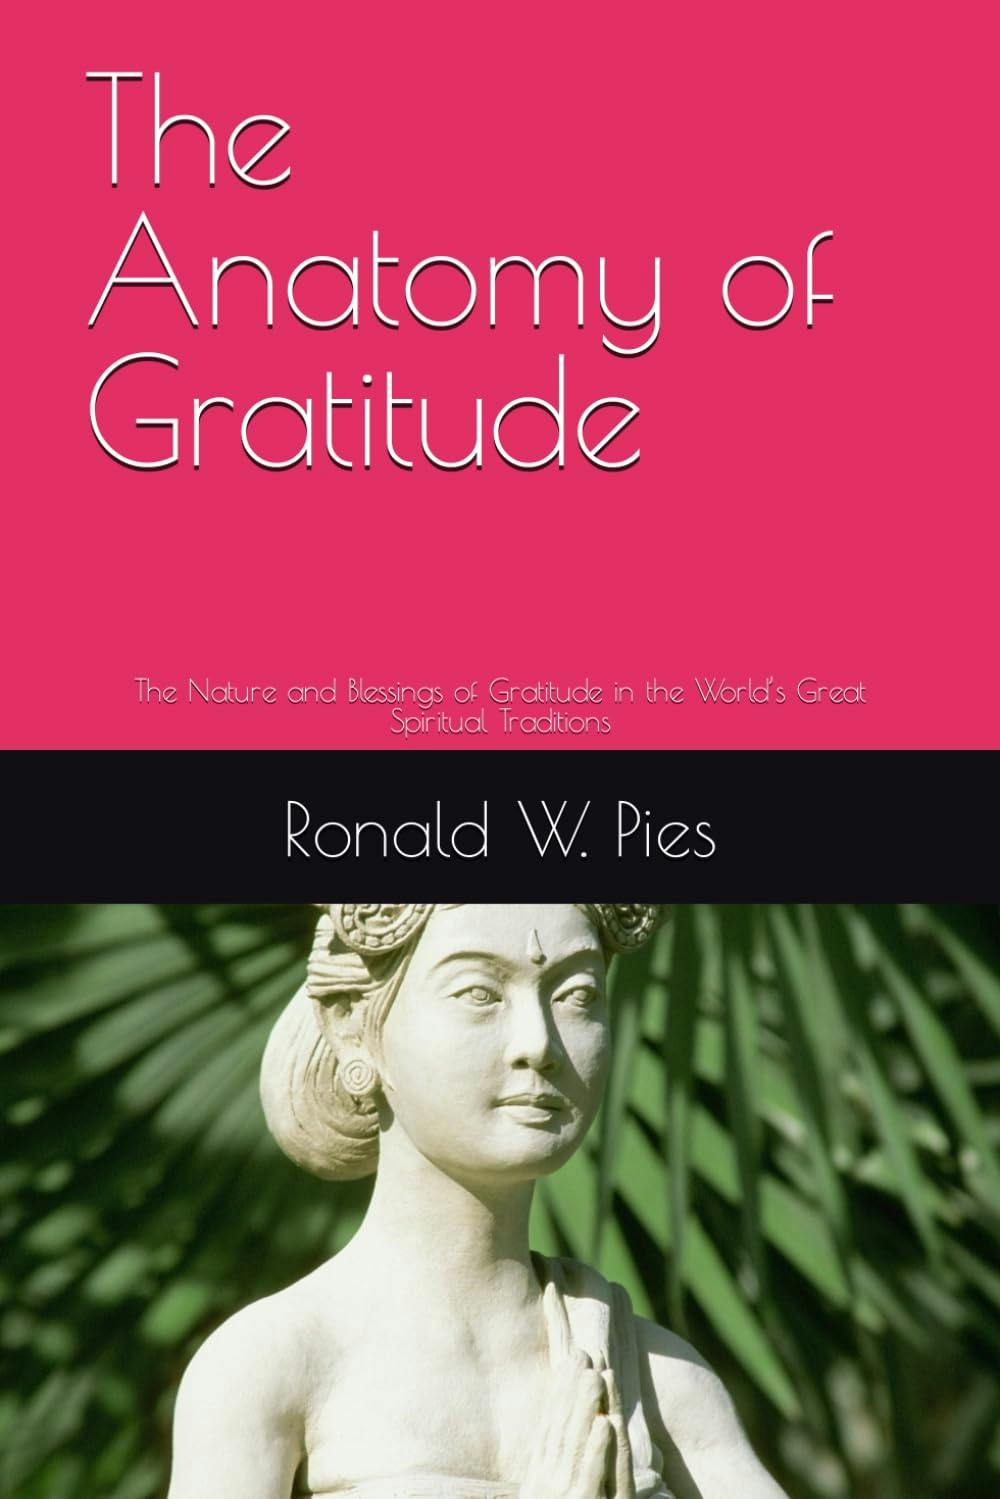 The Anatomy of Gratitude: The Nature and Blessings of Gratitude in the World’s Great Spiritual Traditions By Ronald W. Pies